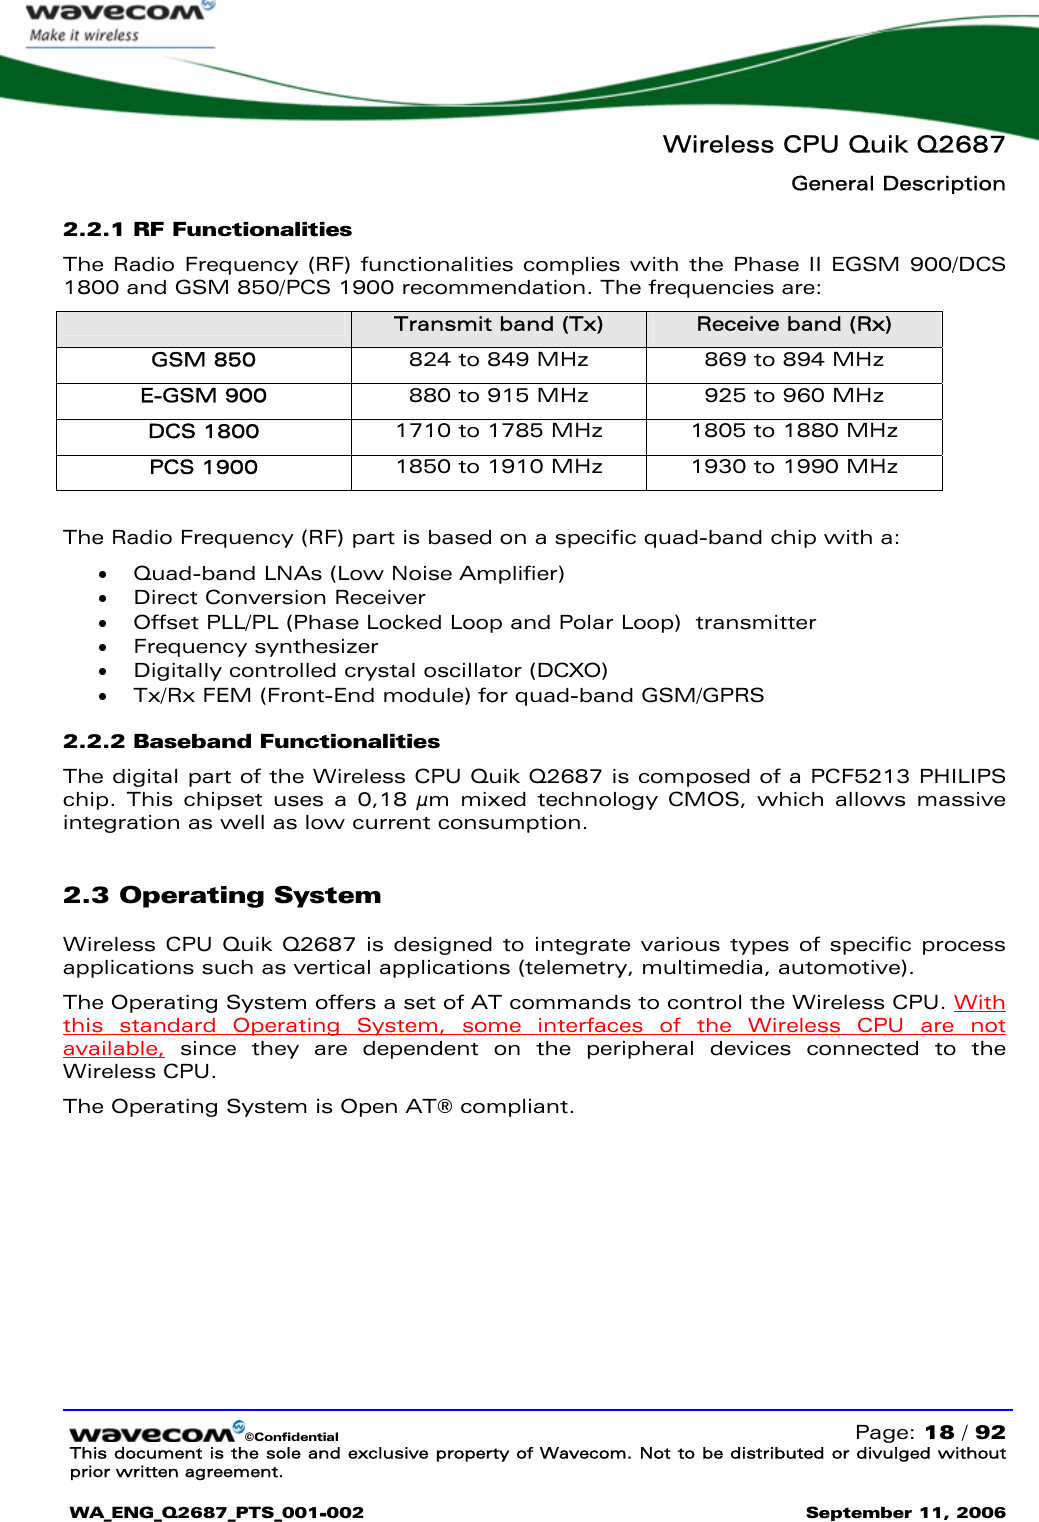   Wireless CPU Quik Q2687 General Description  ©Confidential   Page: 18 / 92 This document is the sole and exclusive property of Wavecom. Not to be distributed or divulged without prior written agreement.  WA_ENG_Q2687_PTS_001-002 September 11, 2006   2.2.1 RF Functionalities  The Radio Frequency (RF) functionalities complies with the Phase II EGSM 900/DCS 1800 and GSM 850/PCS 1900 recommendation. The frequencies are:  Transmit band (Tx)  Receive band (Rx) GSM 850  824 to 849 MHz  869 to 894 MHz E-GSM 900  880 to 915 MHz  925 to 960 MHz DCS 1800  1710 to 1785 MHz  1805 to 1880 MHz PCS 1900  1850 to 1910 MHz  1930 to 1990 MHz  The Radio Frequency (RF) part is based on a specific quad-band chip with a: • Quad-band LNAs (Low Noise Amplifier) • Direct Conversion Receiver • Offset PLL/PL (Phase Locked Loop and Polar Loop)  transmitter • Frequency synthesizer • Digitally controlled crystal oscillator (DCXO) • Tx/Rx FEM (Front-End module) for quad-band GSM/GPRS 2.2.2 Baseband Functionalities The digital part of the Wireless CPU Quik Q2687 is composed of a PCF5213 PHILIPS chip. This chipset uses a 0,18 µm mixed technology CMOS, which allows massive integration as well as low current consumption. 2.3 Operating System Wireless CPU Quik Q2687 is designed to integrate various types of specific process applications such as vertical applications (telemetry, multimedia, automotive). The Operating System offers a set of AT commands to control the Wireless CPU. With this standard Operating System, some interfaces of the Wireless CPU are not available, since they are dependent on the peripheral devices connected to the Wireless CPU.  The Operating System is Open AT® compliant. 